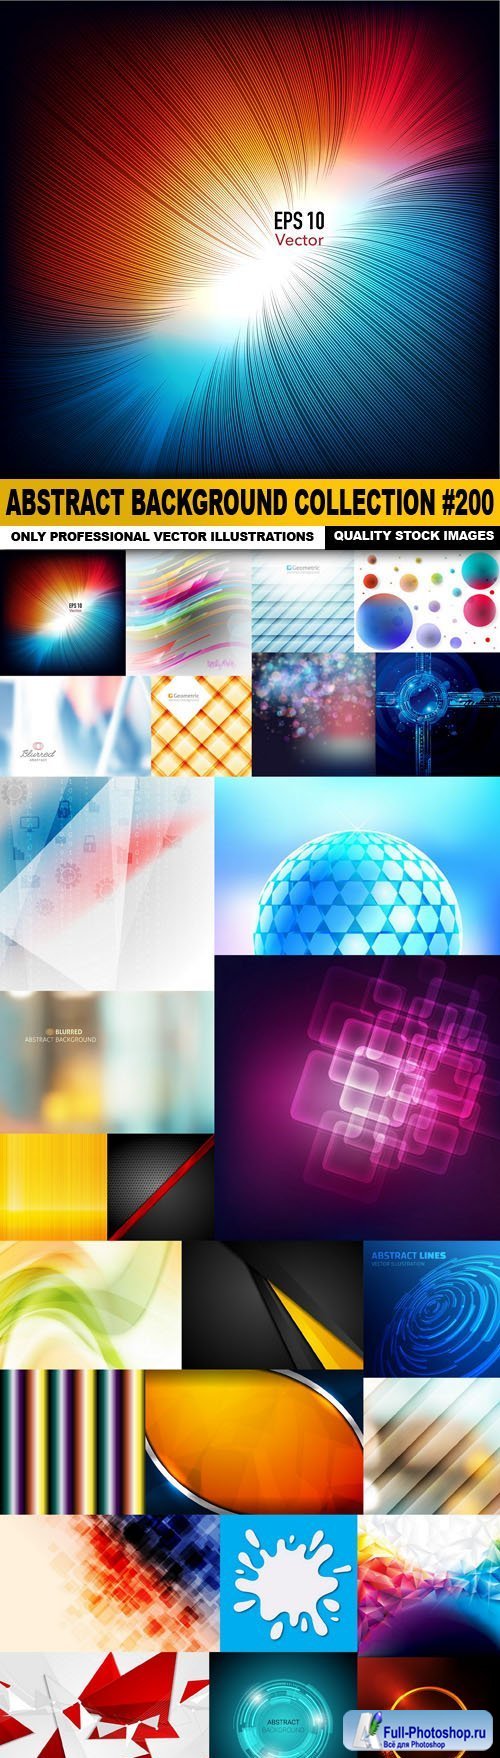 Abstract Background Collection #200 - 26 Vector